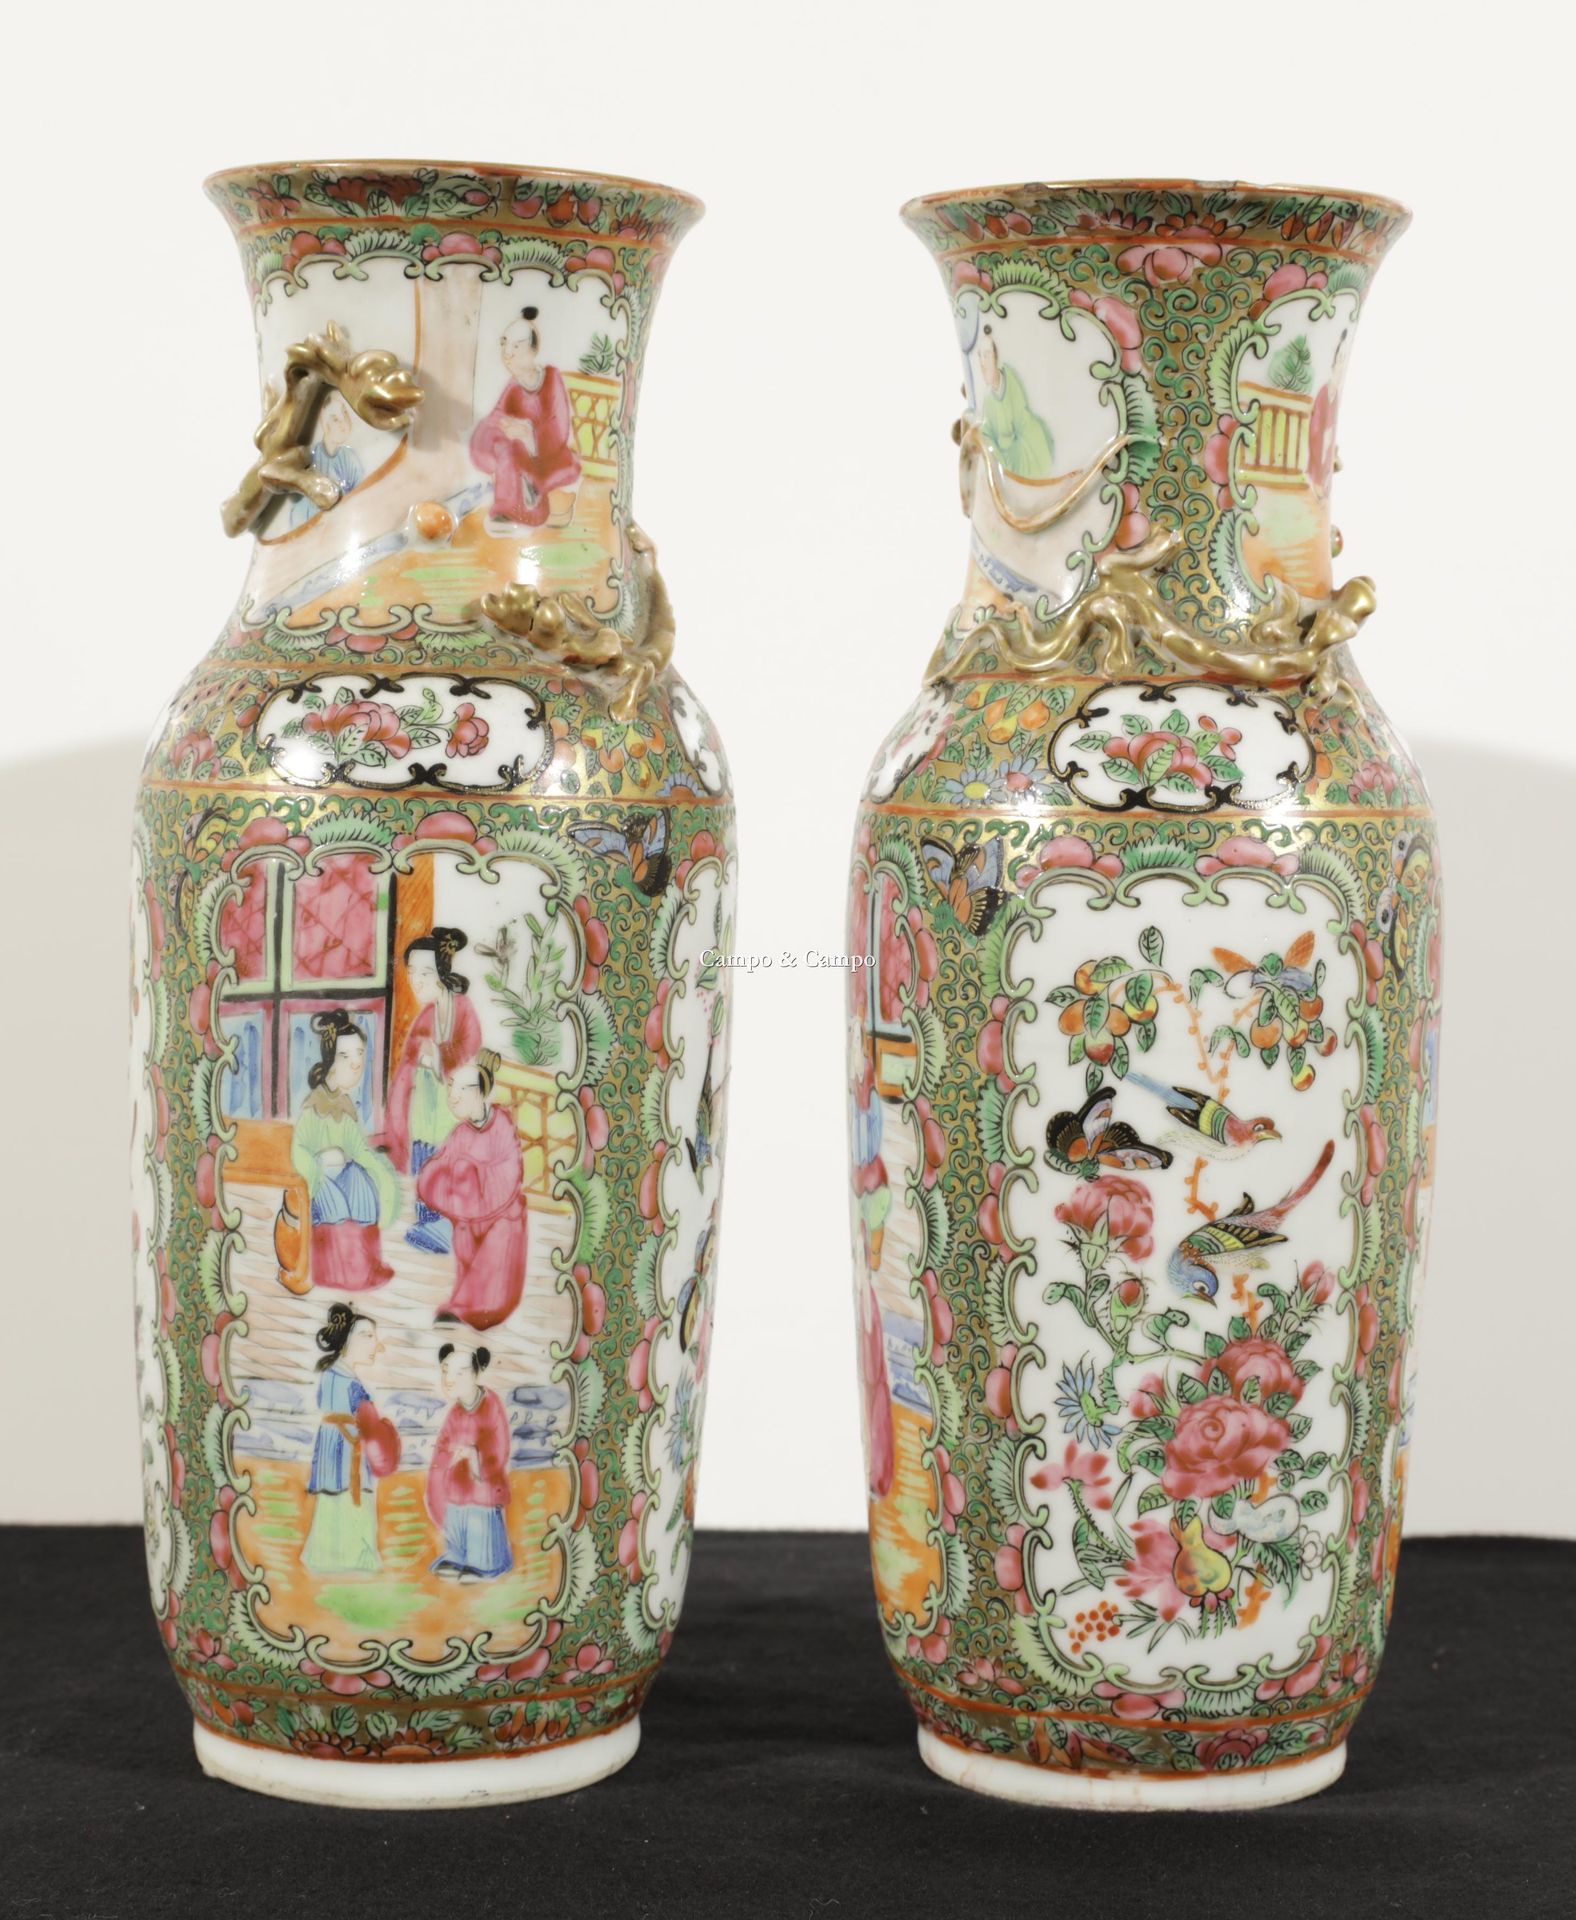 VARIA Pair of Canton porcelain vases with dragon decoration on the neck
Paar vaz&hellip;